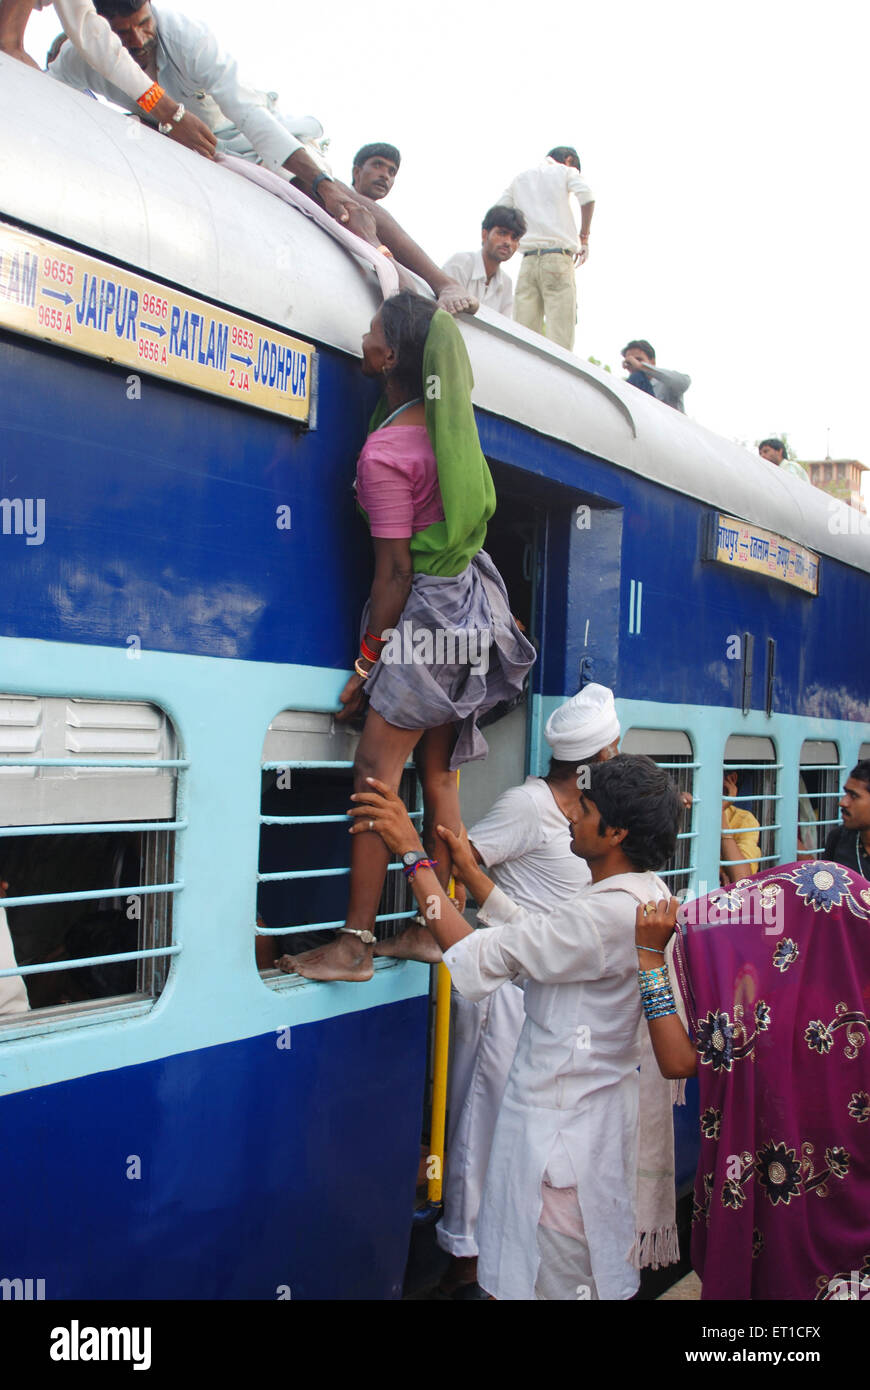 Men dragging woman up trying to climb on roof of train at Jodhpur station Rajasthan India Stock Photo